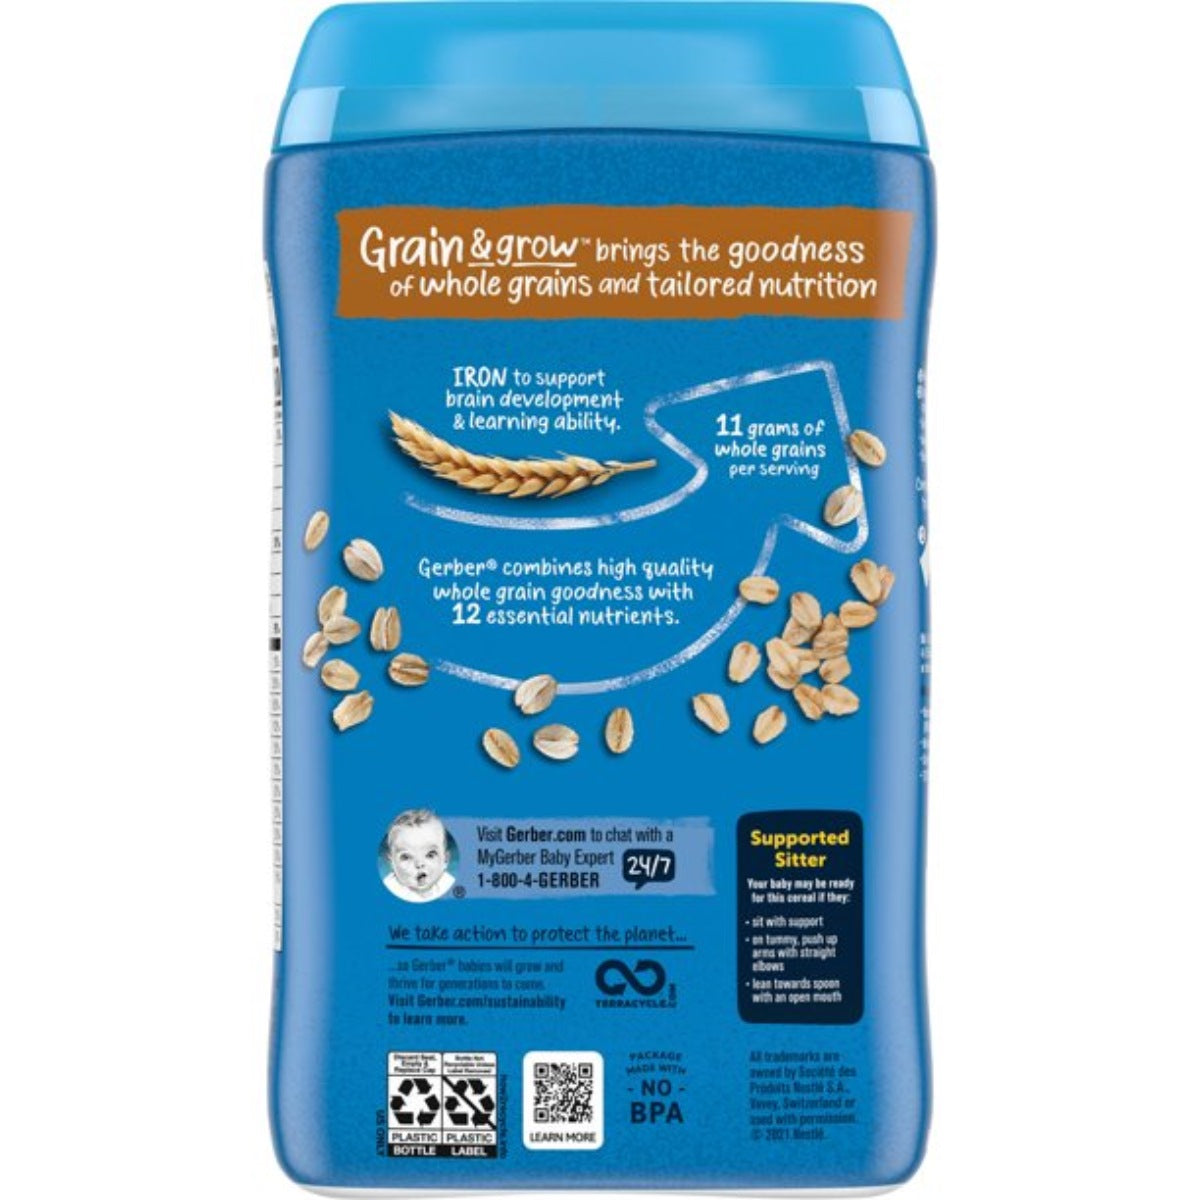 Gerber Cereal for Baby, Oatmeal for Supported Sitter (16oz)